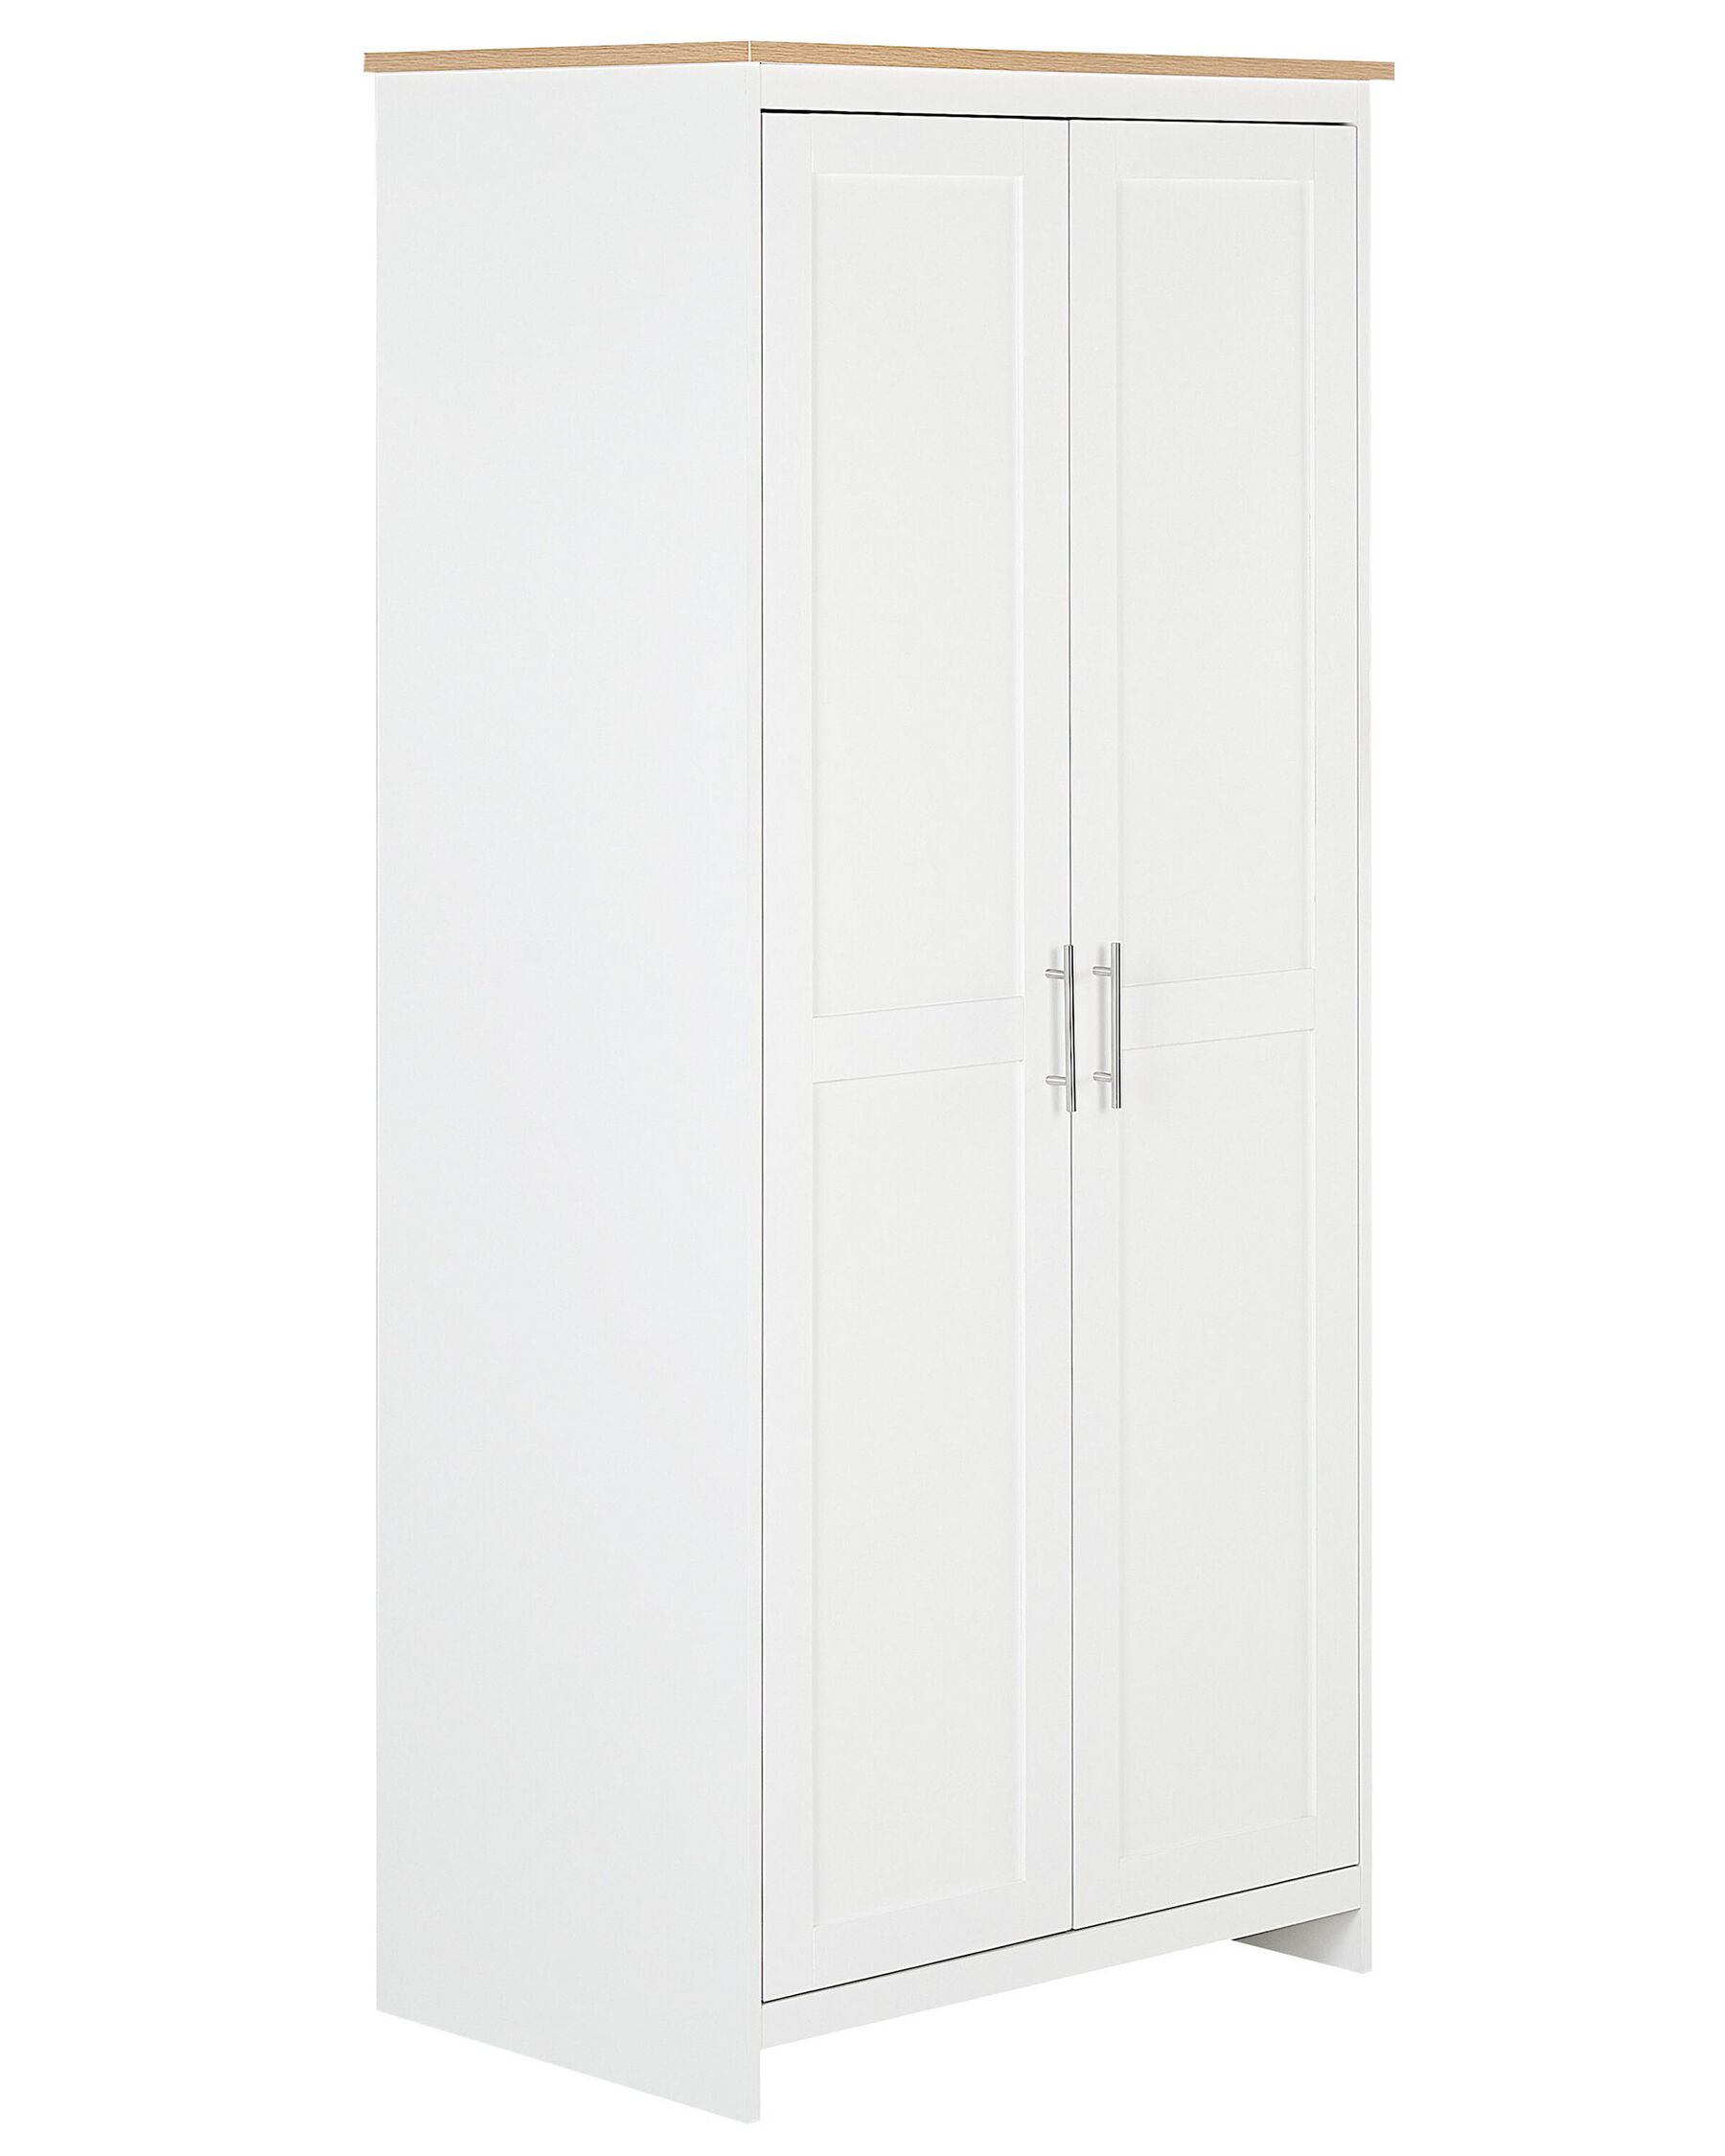 Wardrobe Hinged Panel Doors Particle Board Clothes Rail Shelves White Sellin